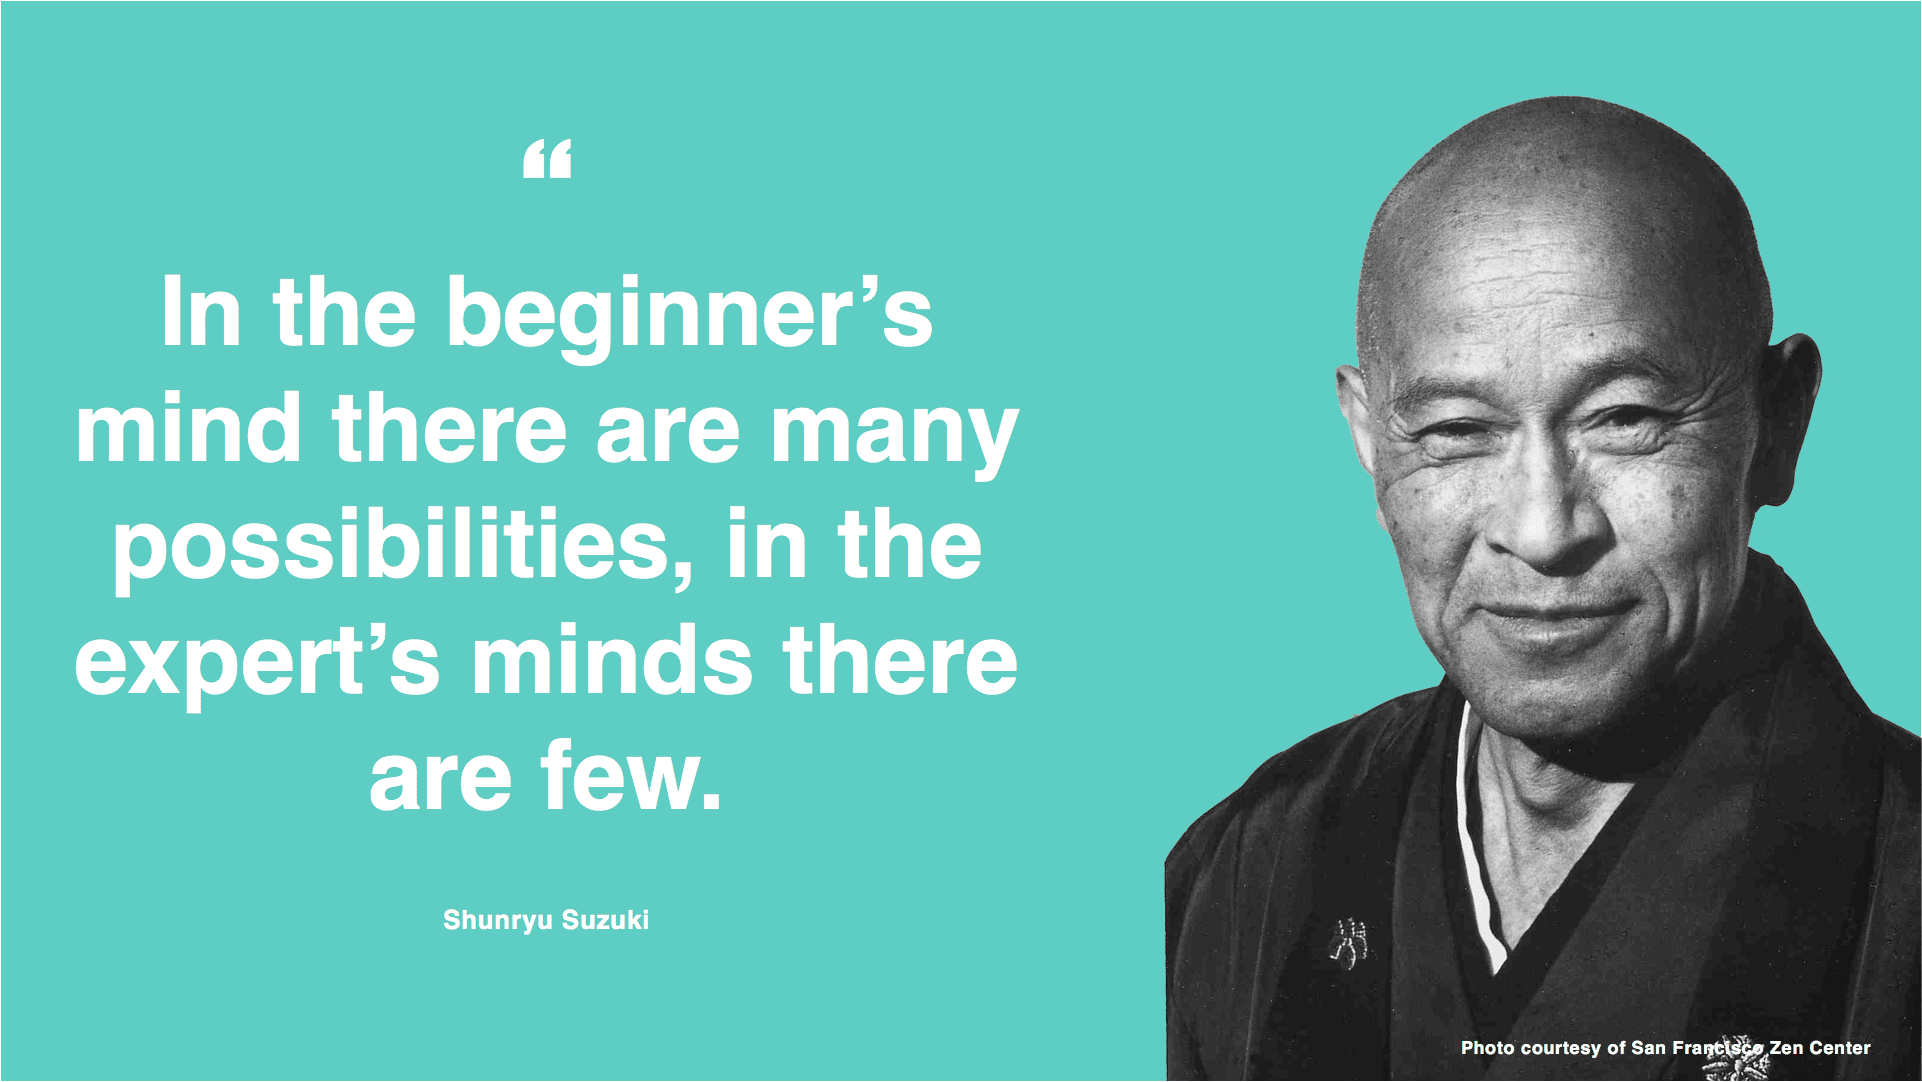 "In the beginner's mind there are many possibilities, in the expert's minds there are few." - Shunryu Suzuki